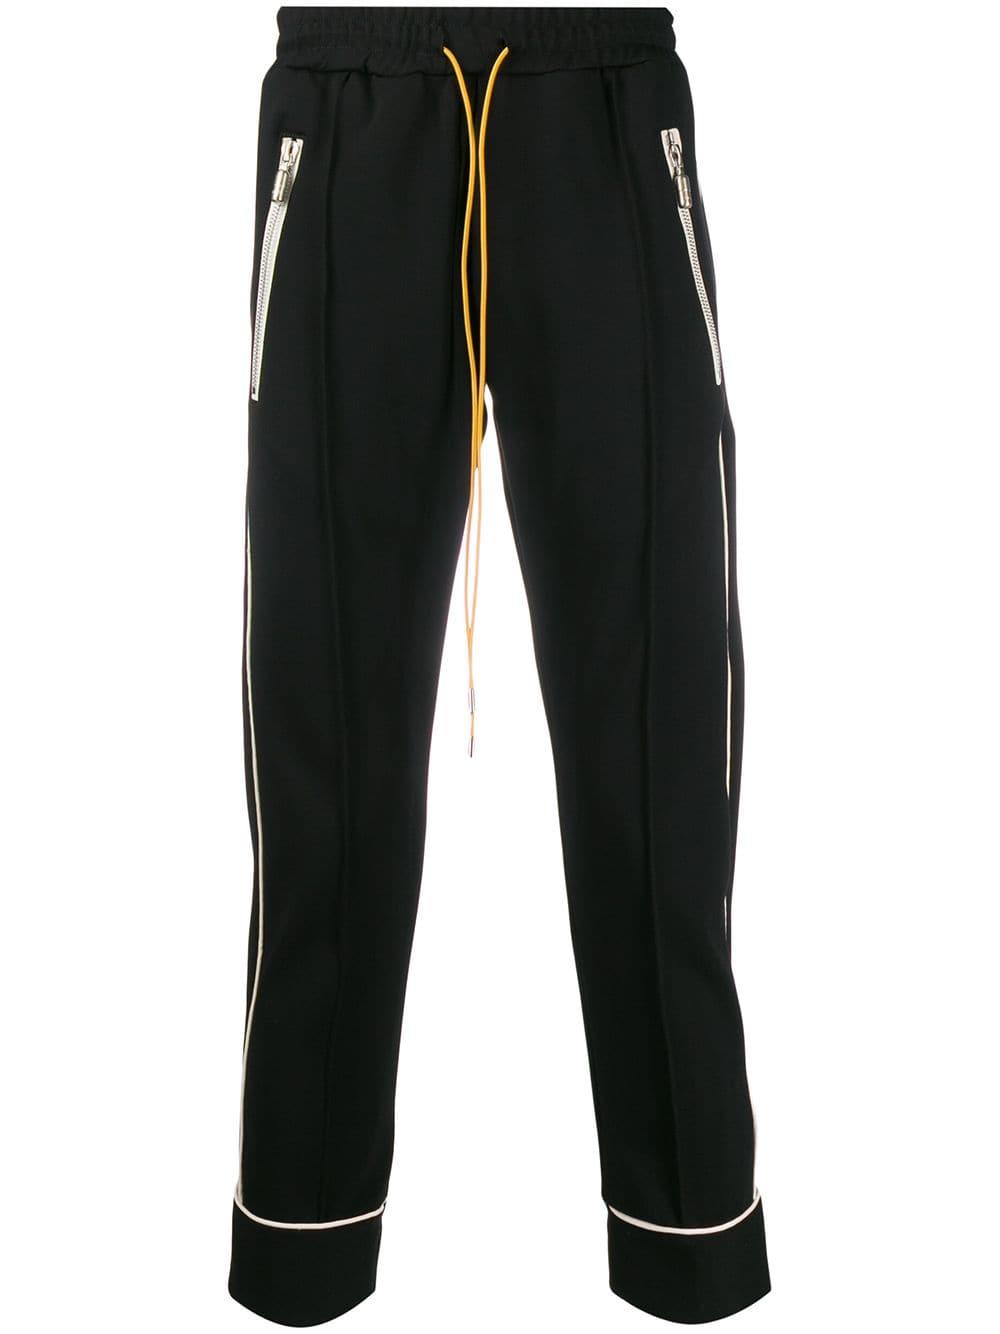 Rhude Synthetic Zipped Track Pants in Black for Men - Lyst